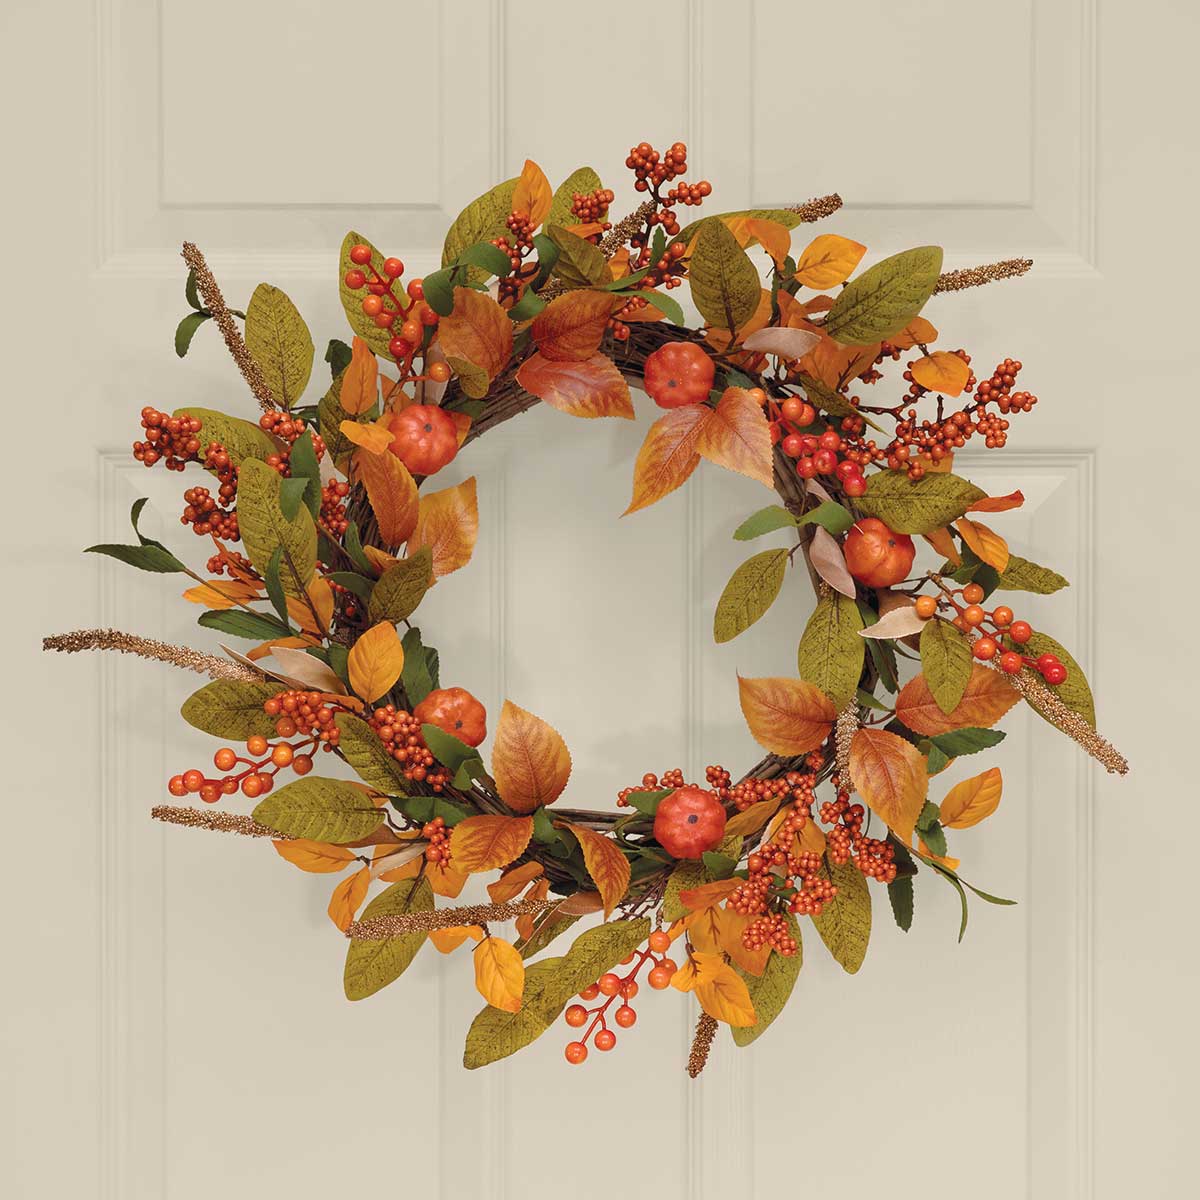 WREATH HARVEST BOUNTY 22IN (INNER RING 11IN) - Click Image to Close